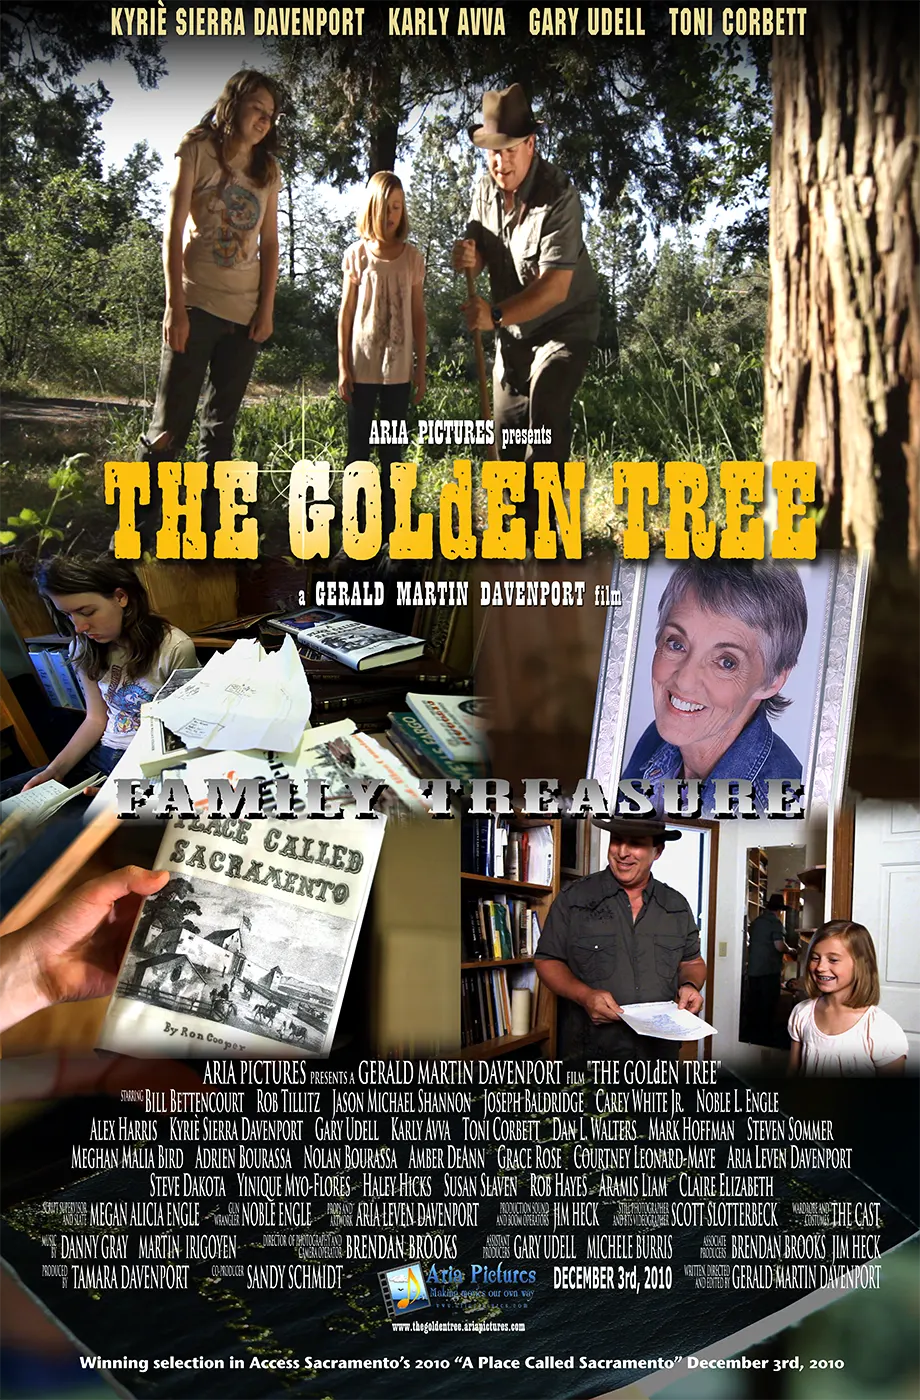 Family Treasure poster from THE GOLdEN TREE (2010).